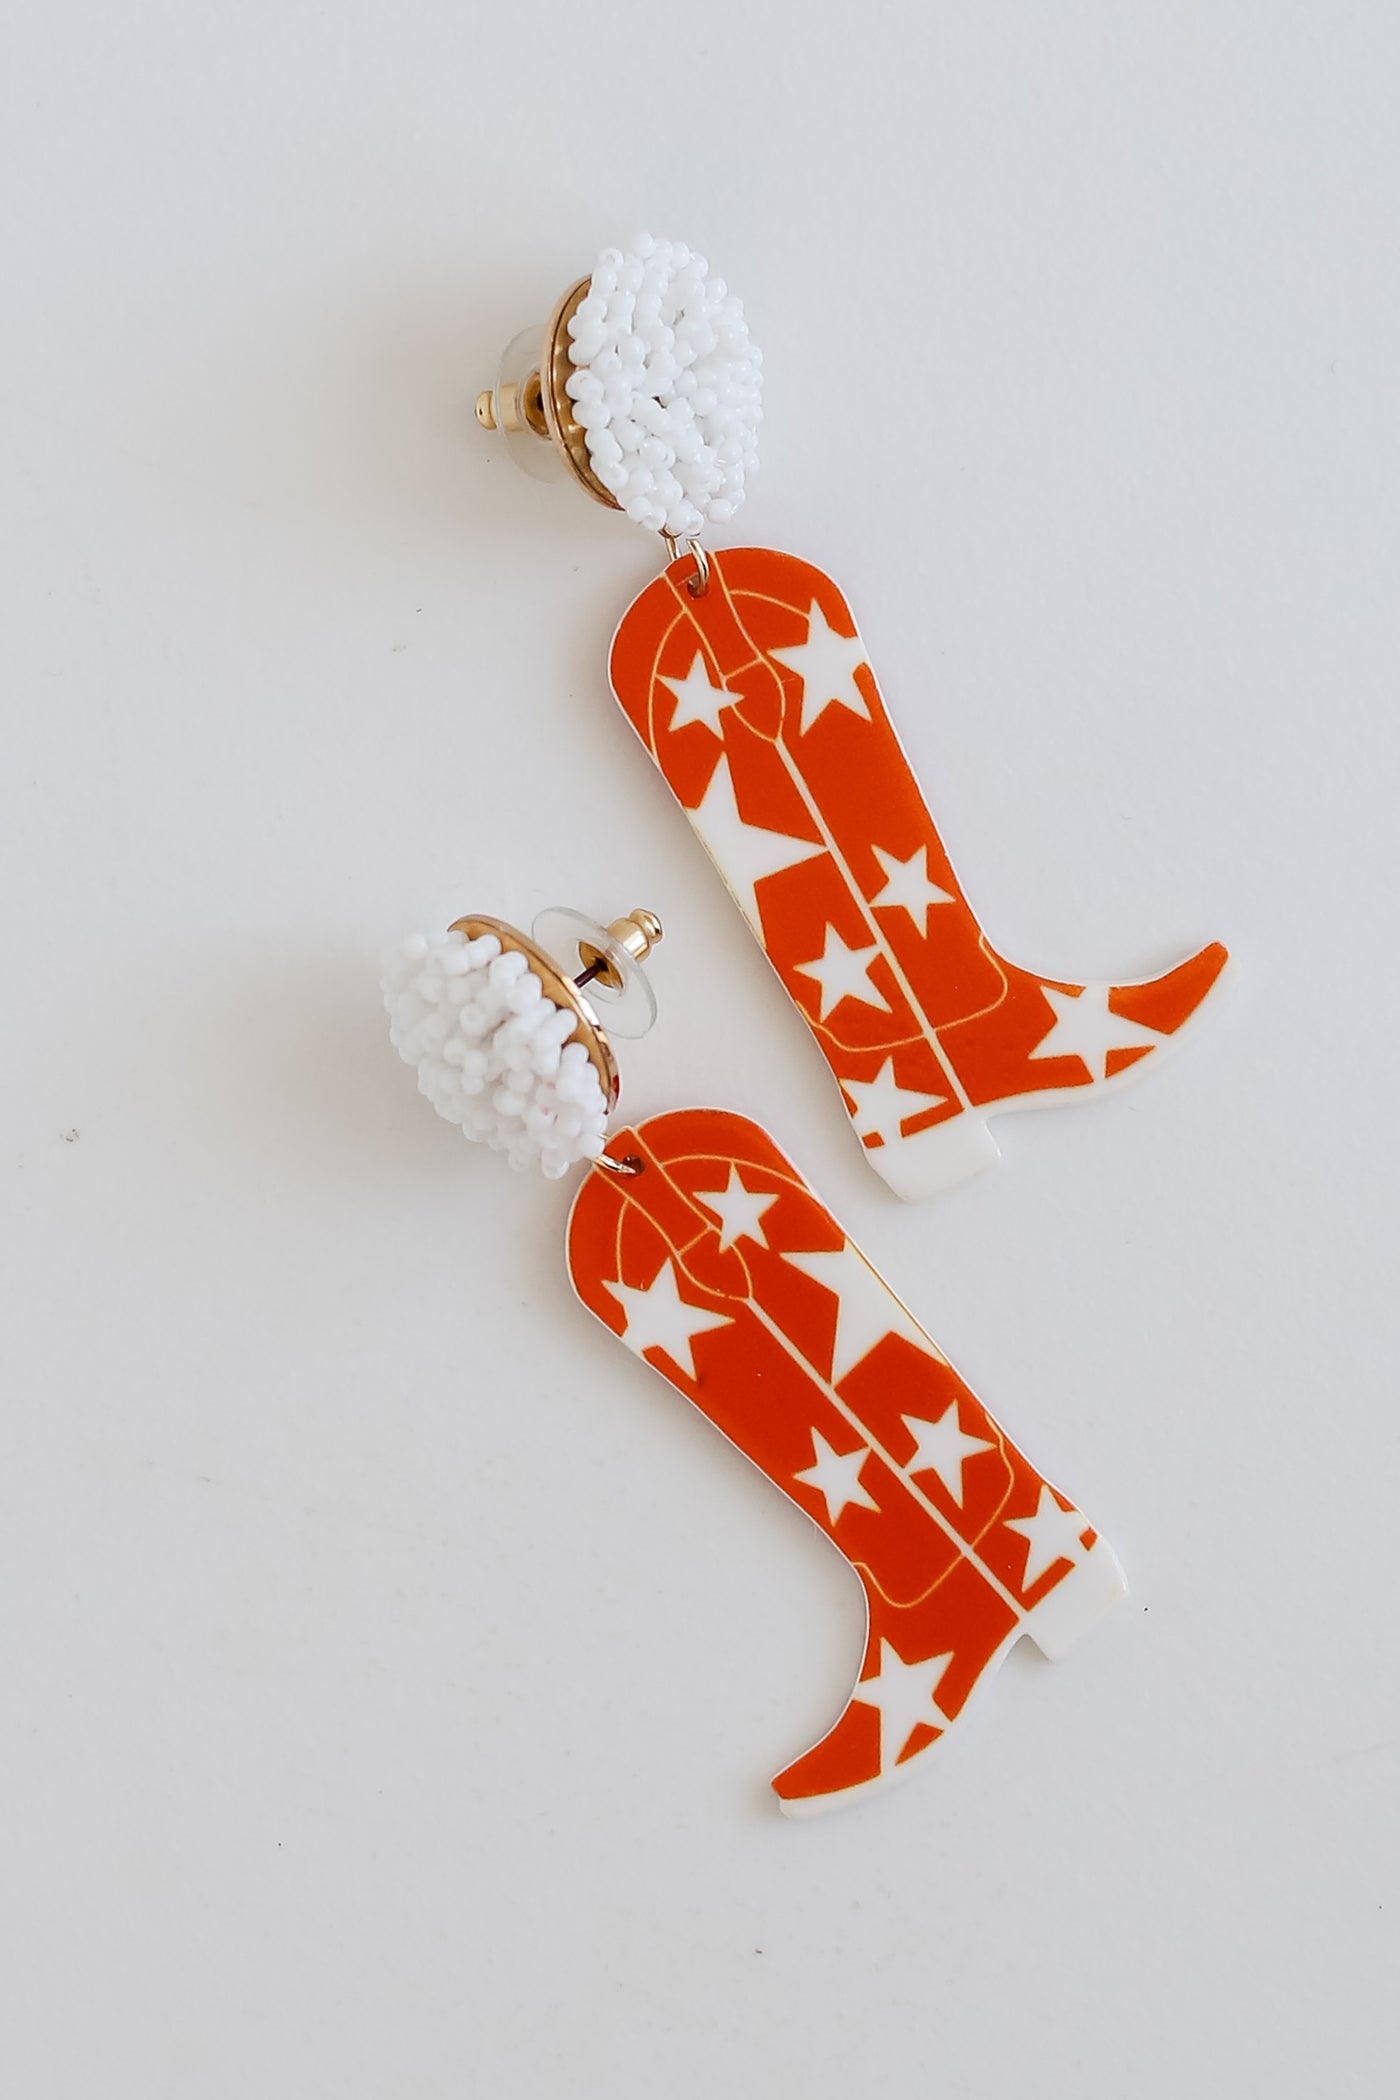 Orange + White Cowboy Boot Earrings for game day